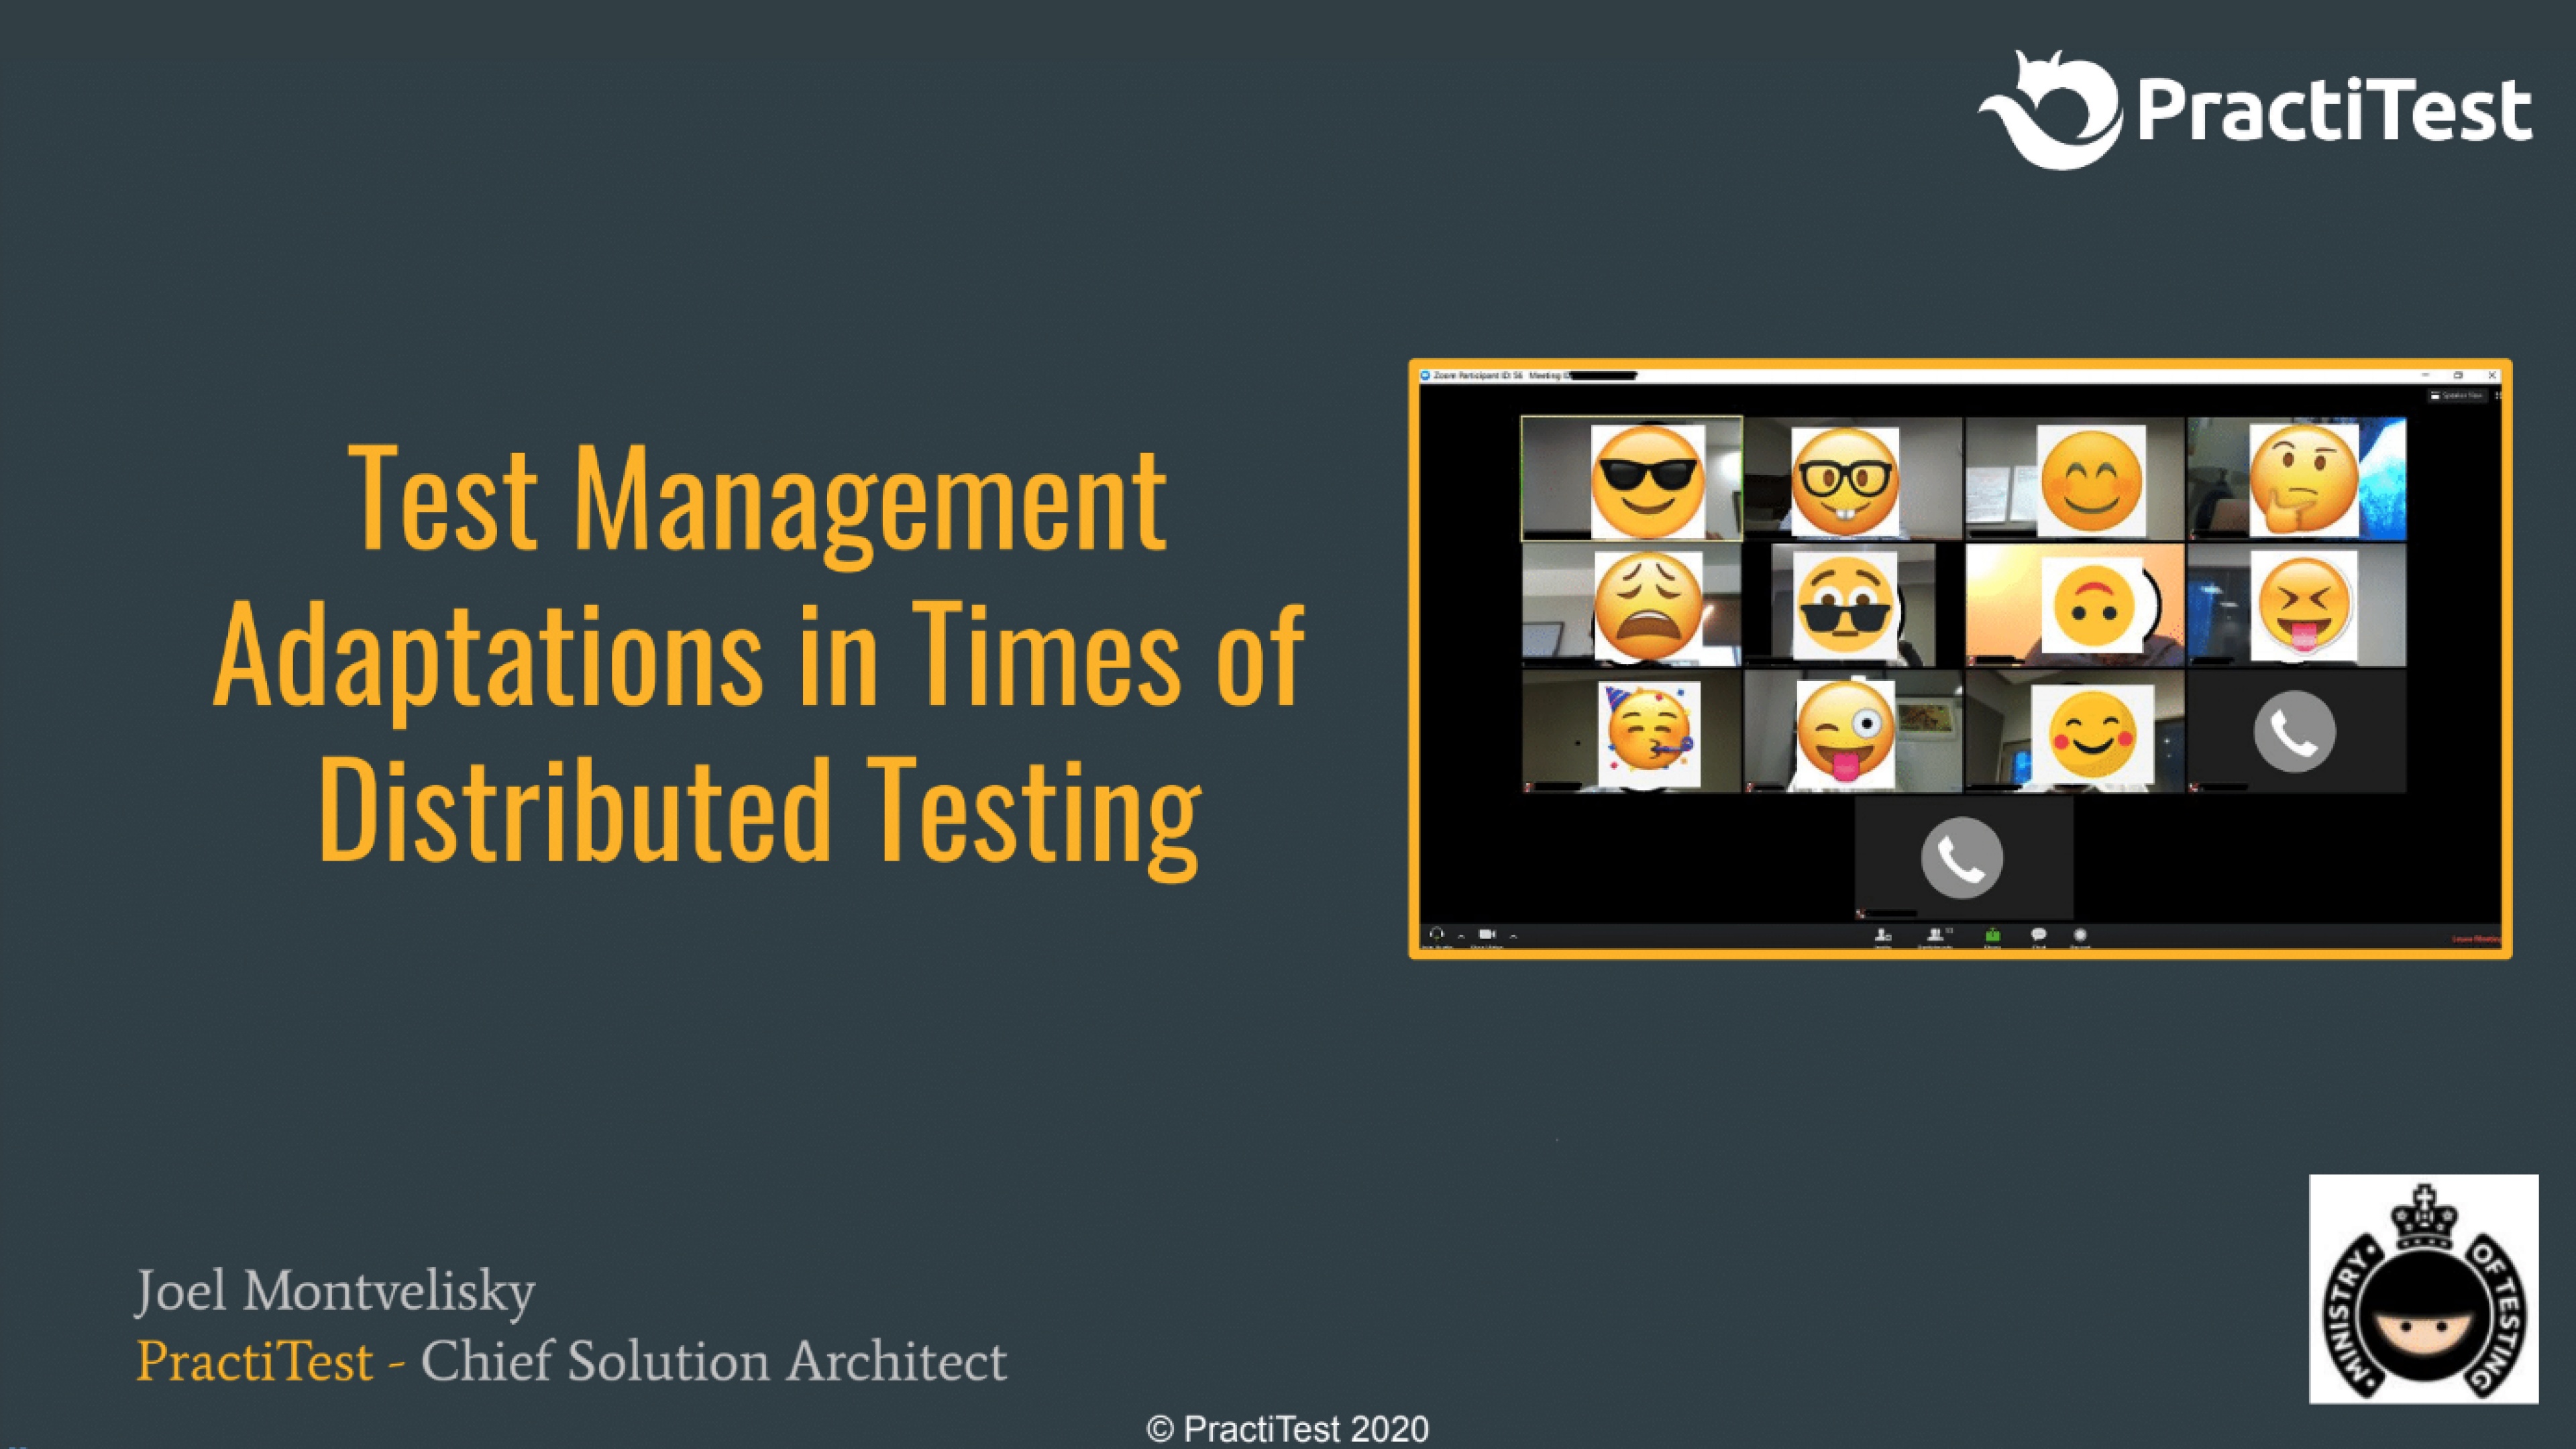 Test Management adaptations in times of Distributed Testing with Joel Montvelisky